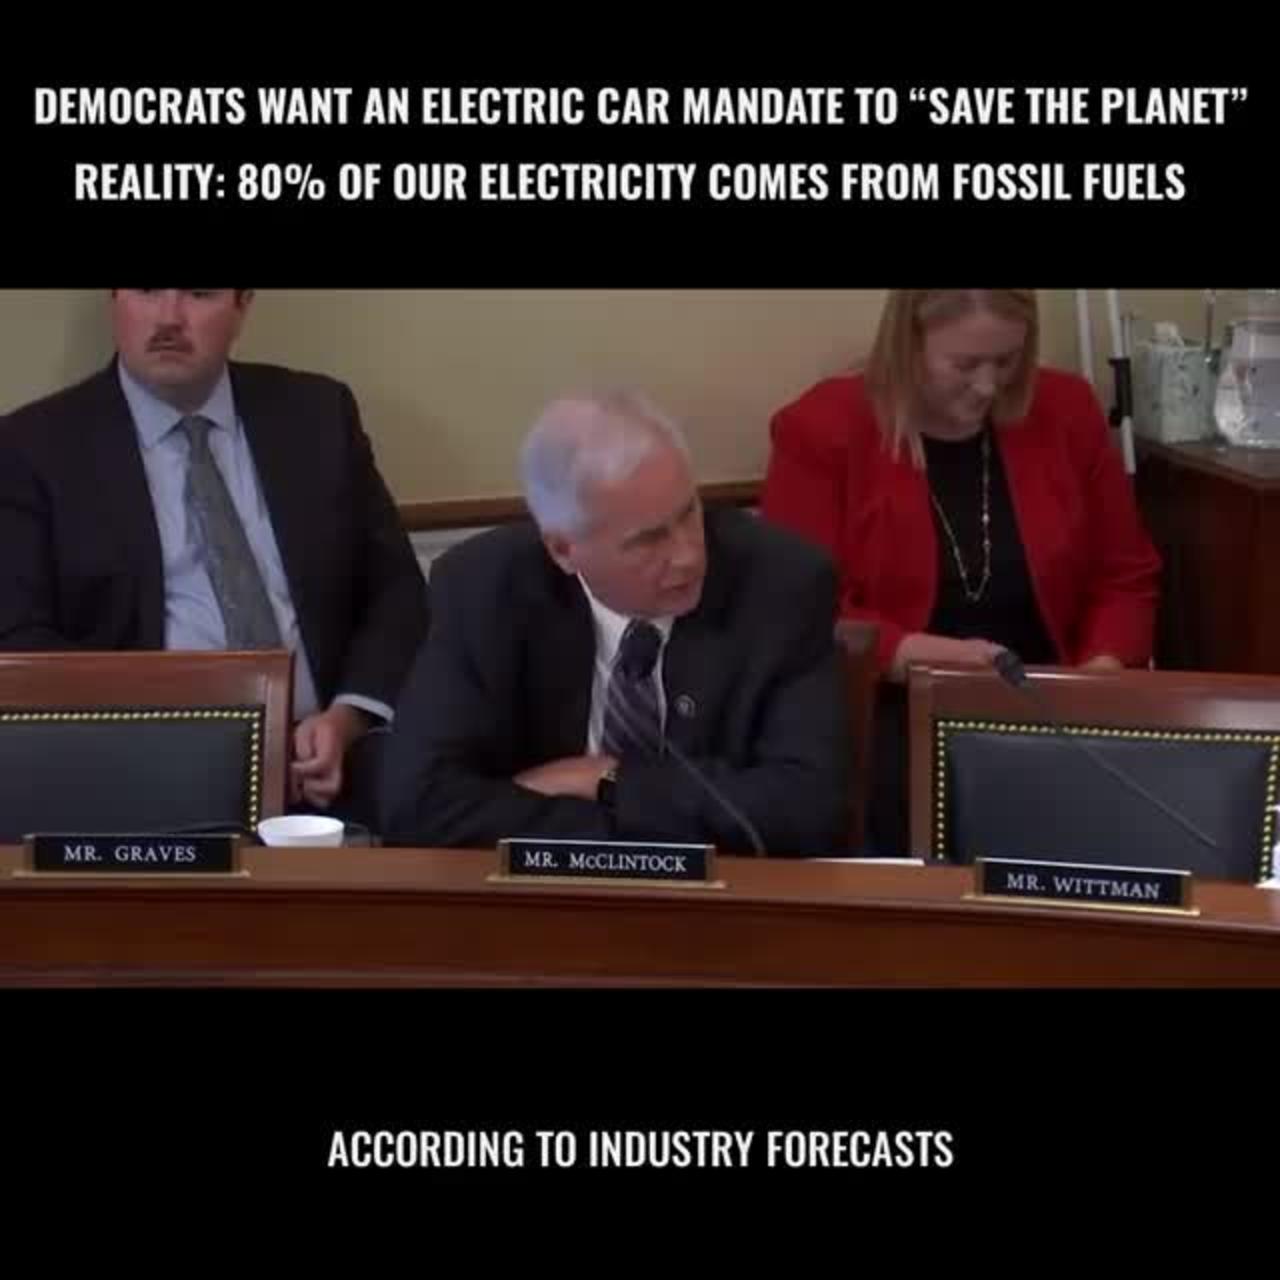 Dems Want Electric Car Mandate to Save the Planet